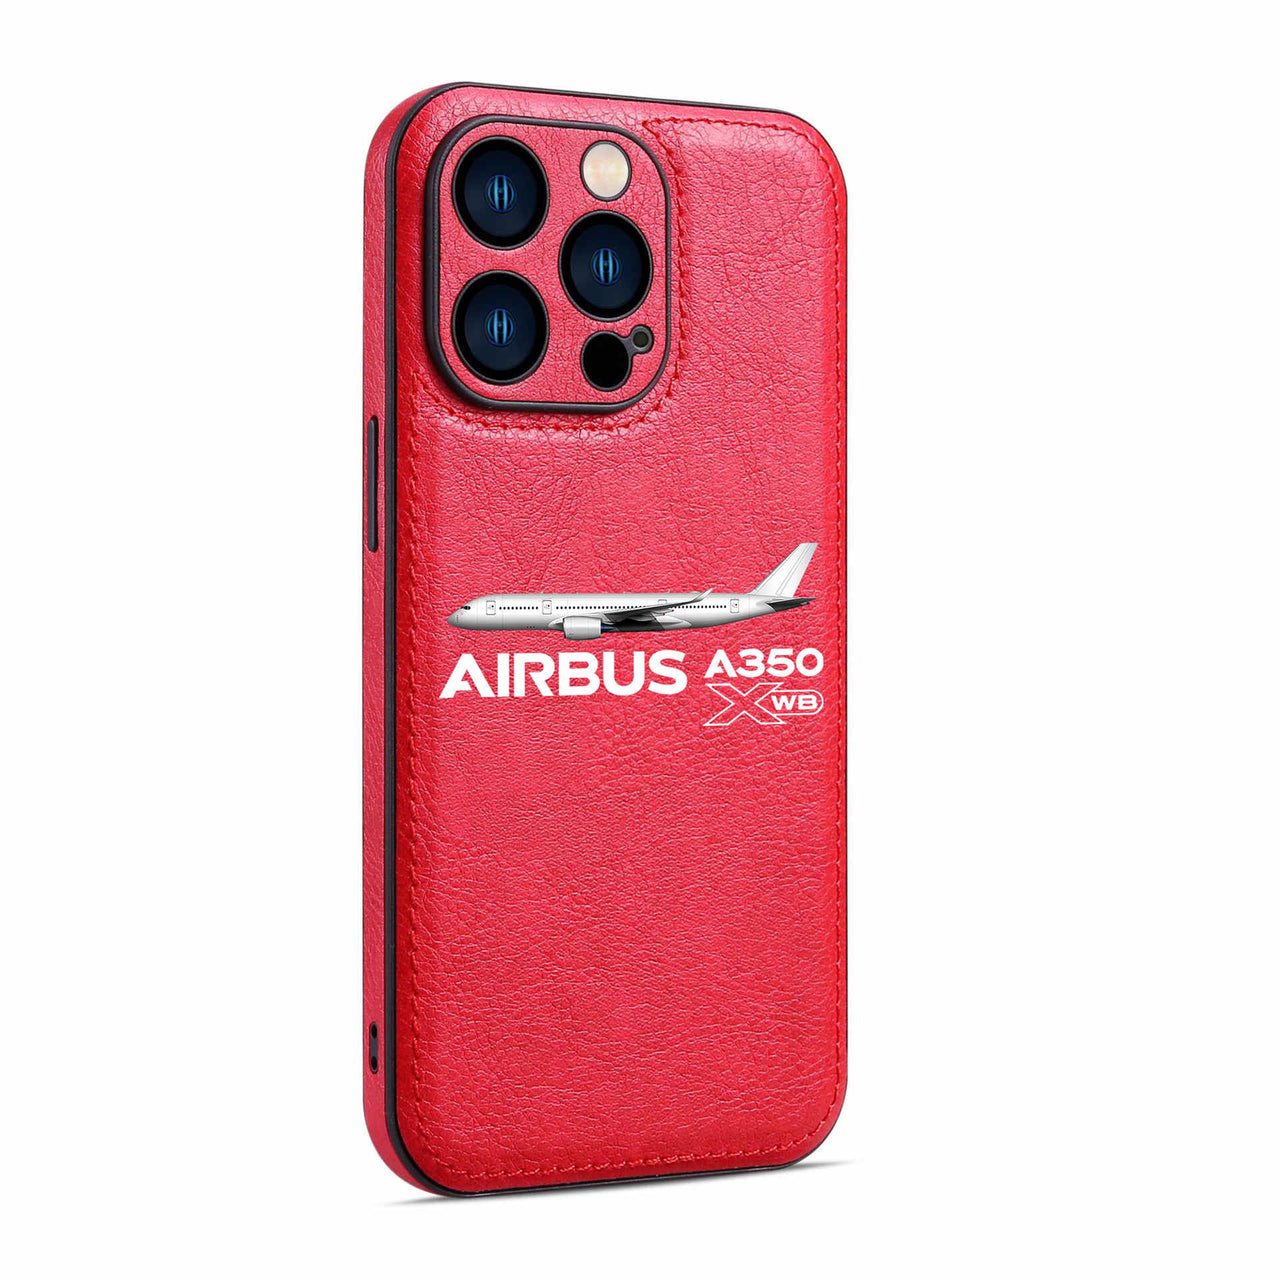 The Airbus A350 WXB Designed Leather iPhone Cases